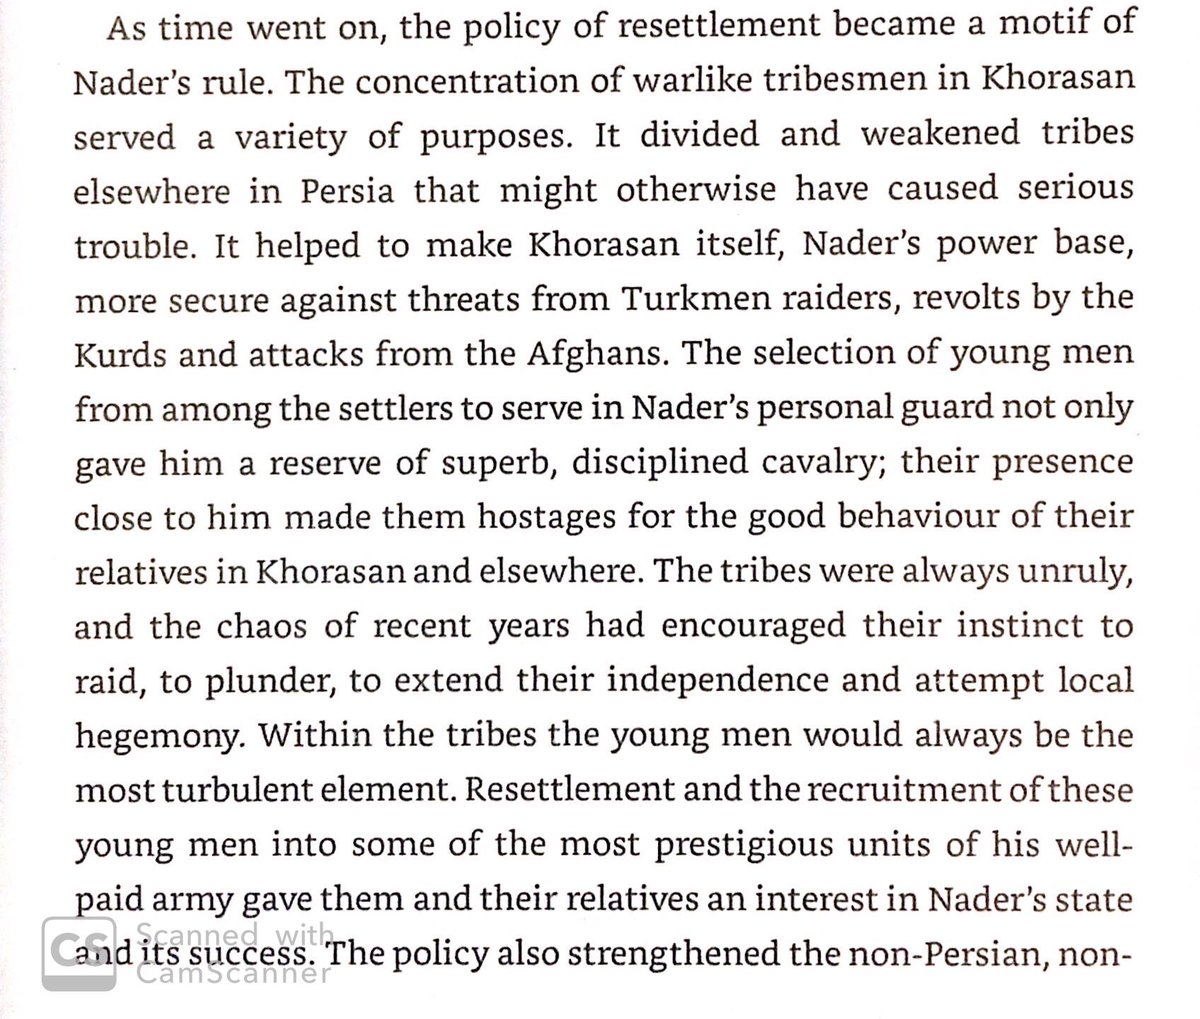 Nader resettled many unruly tribes in Khorasan, weakening separatists in other parts of Iran & garrisoning the NE against raiders. Sunni tribesmen were useful as Nader’s loyal soldiers, lacking the dynastic loyalty to the Safavids of the Shia Persians.